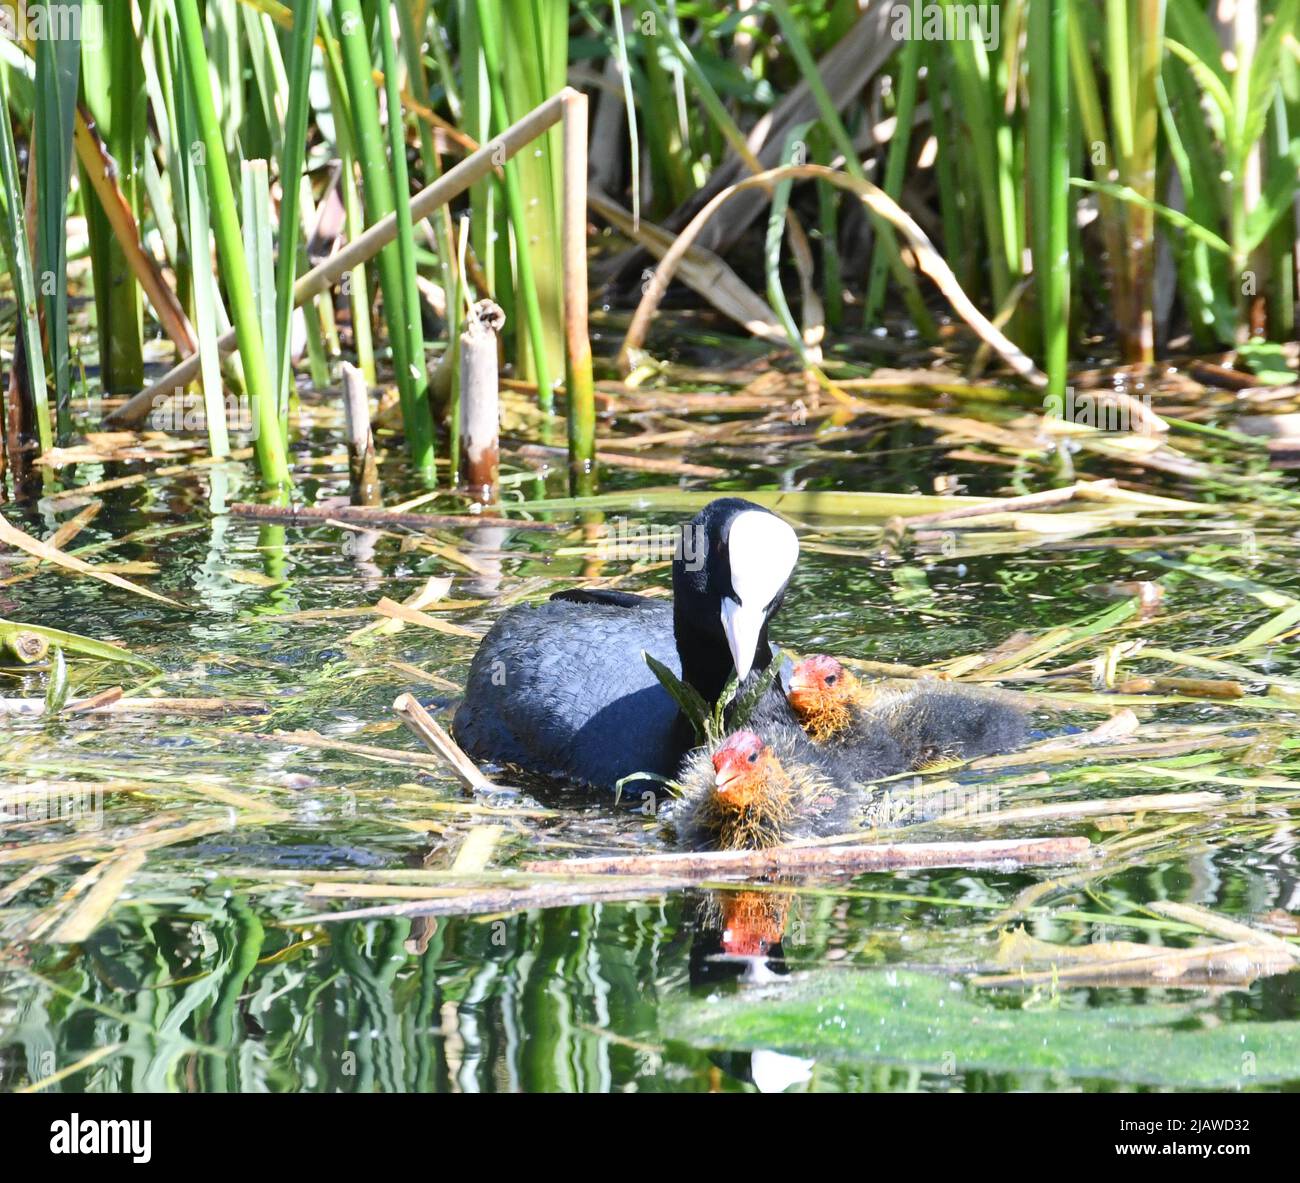 Coots - adult coot with baby chicks at London Wetland Centre, London, England, UK Stock Photo